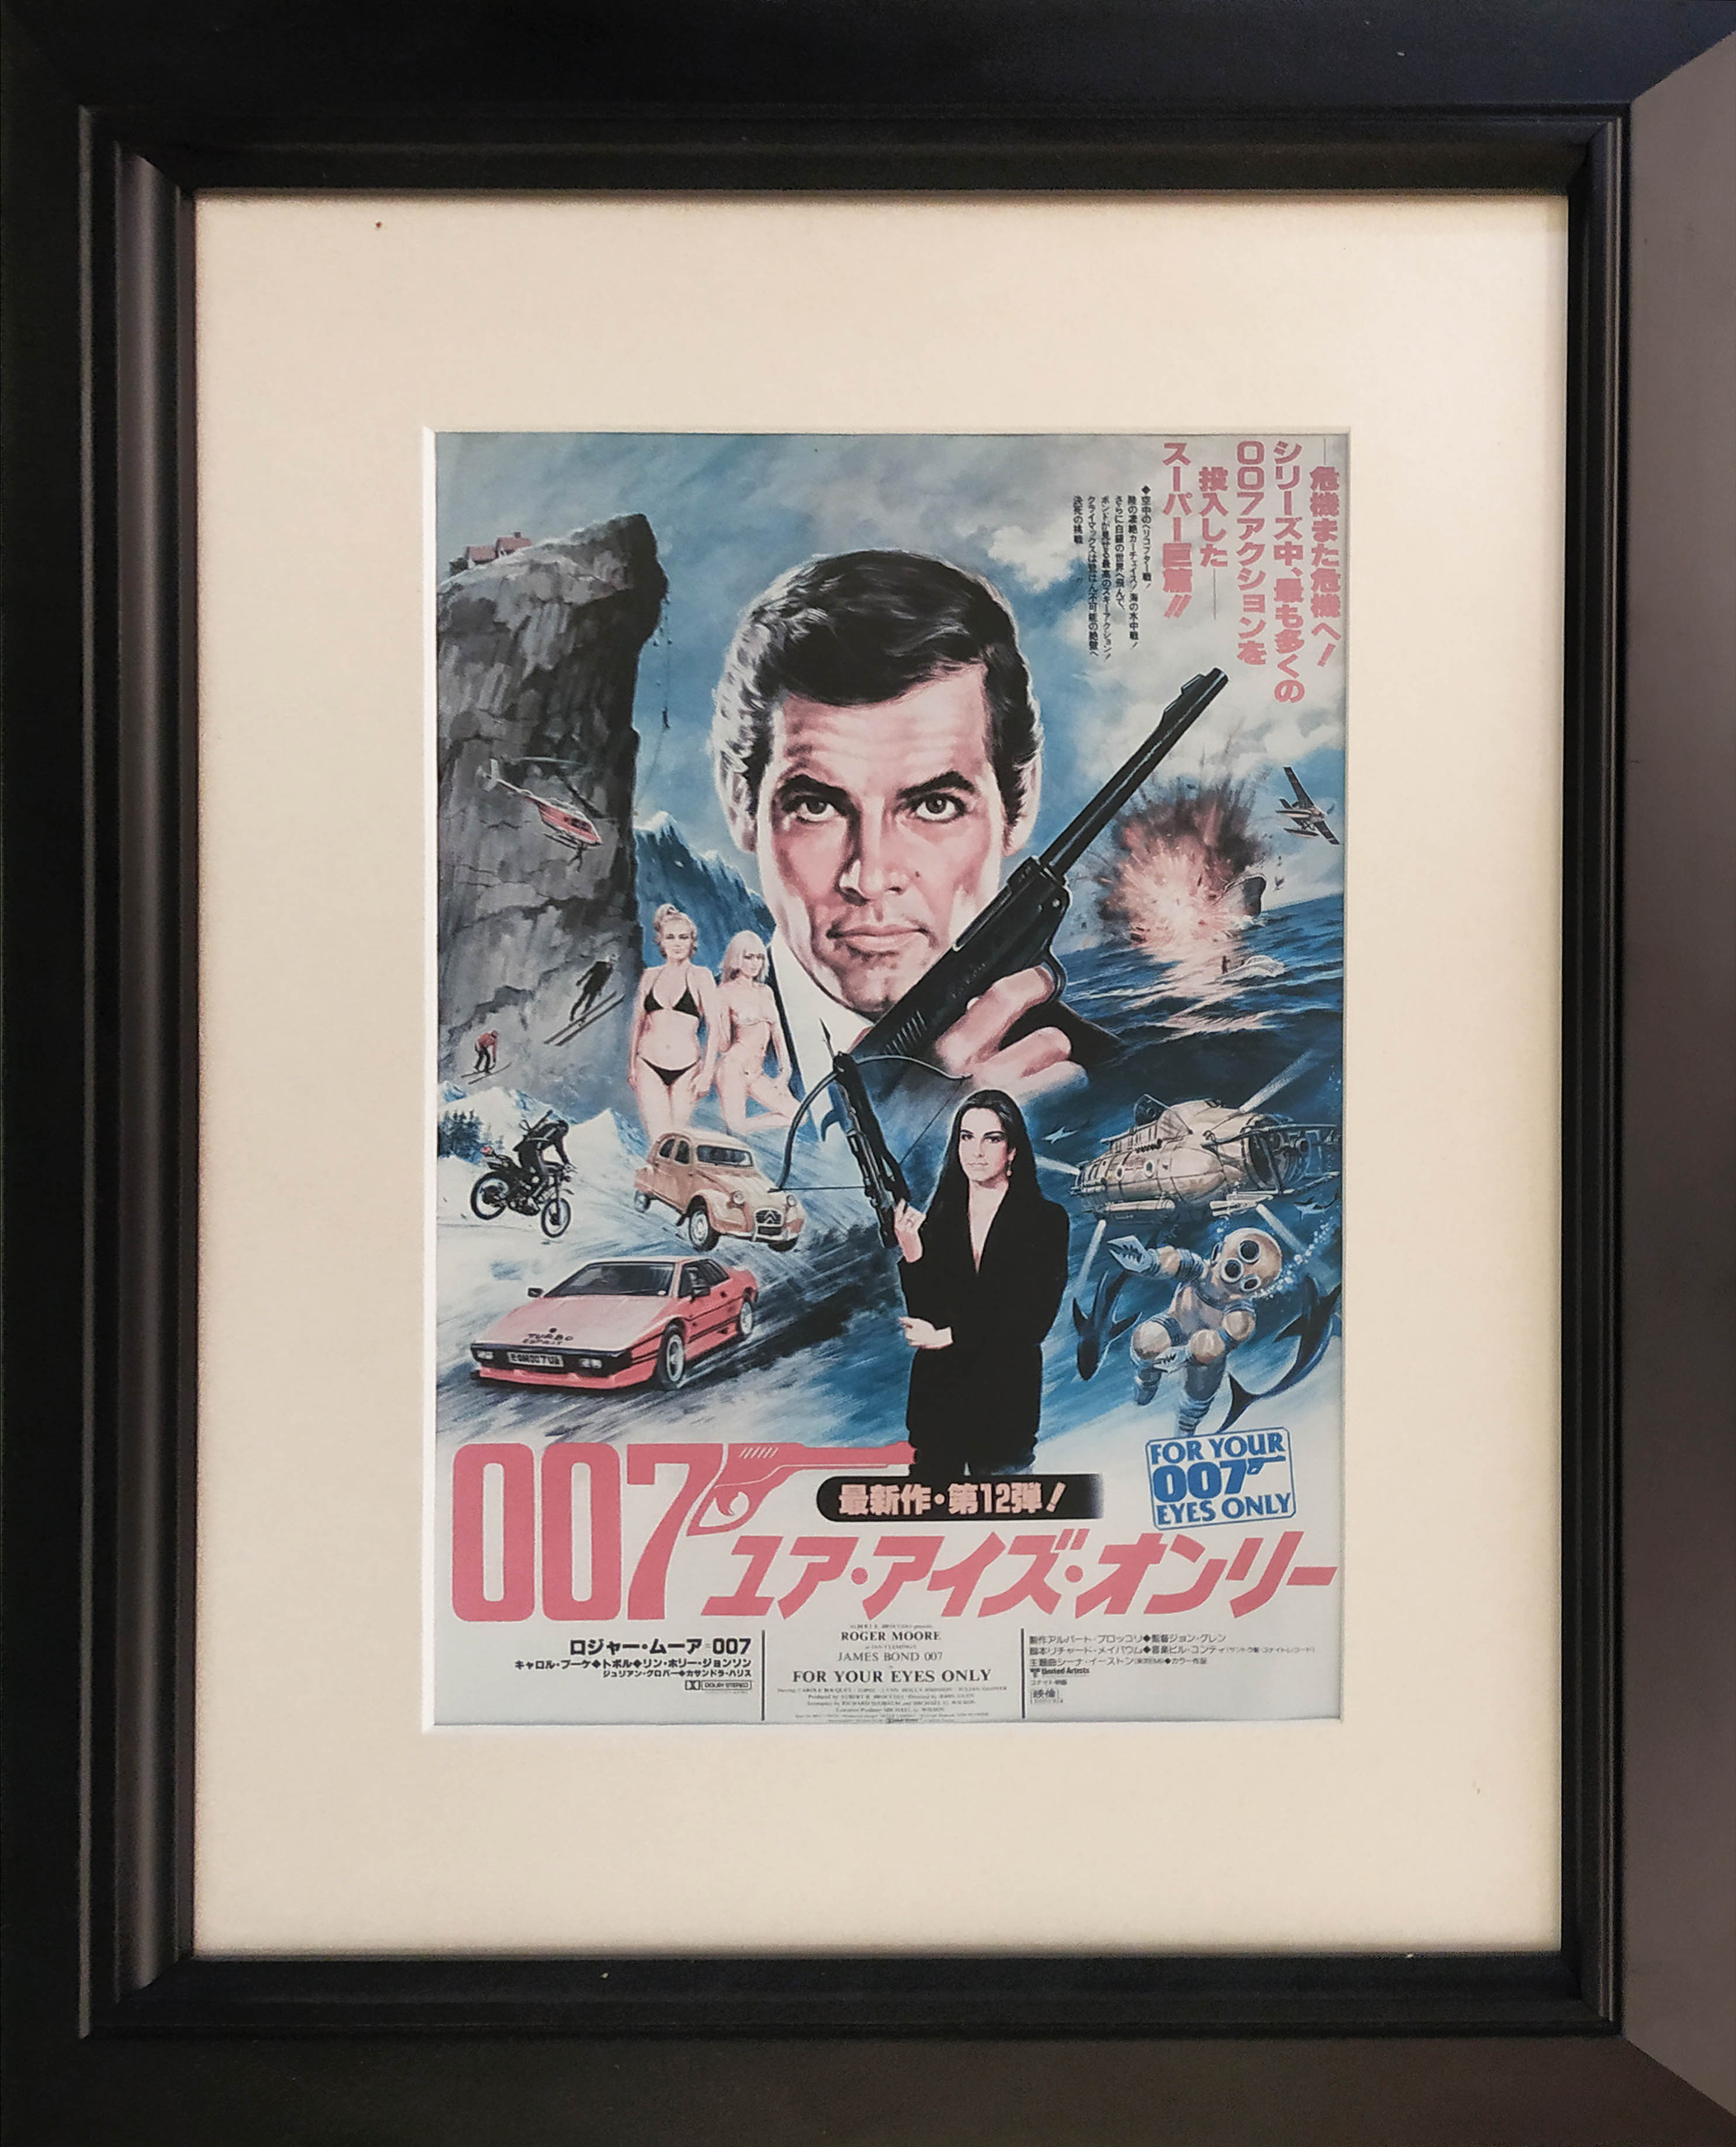 JAMES BOND, united artists MGM & Eon productions 'reproduction offset lithographic film posters', - Image 4 of 13